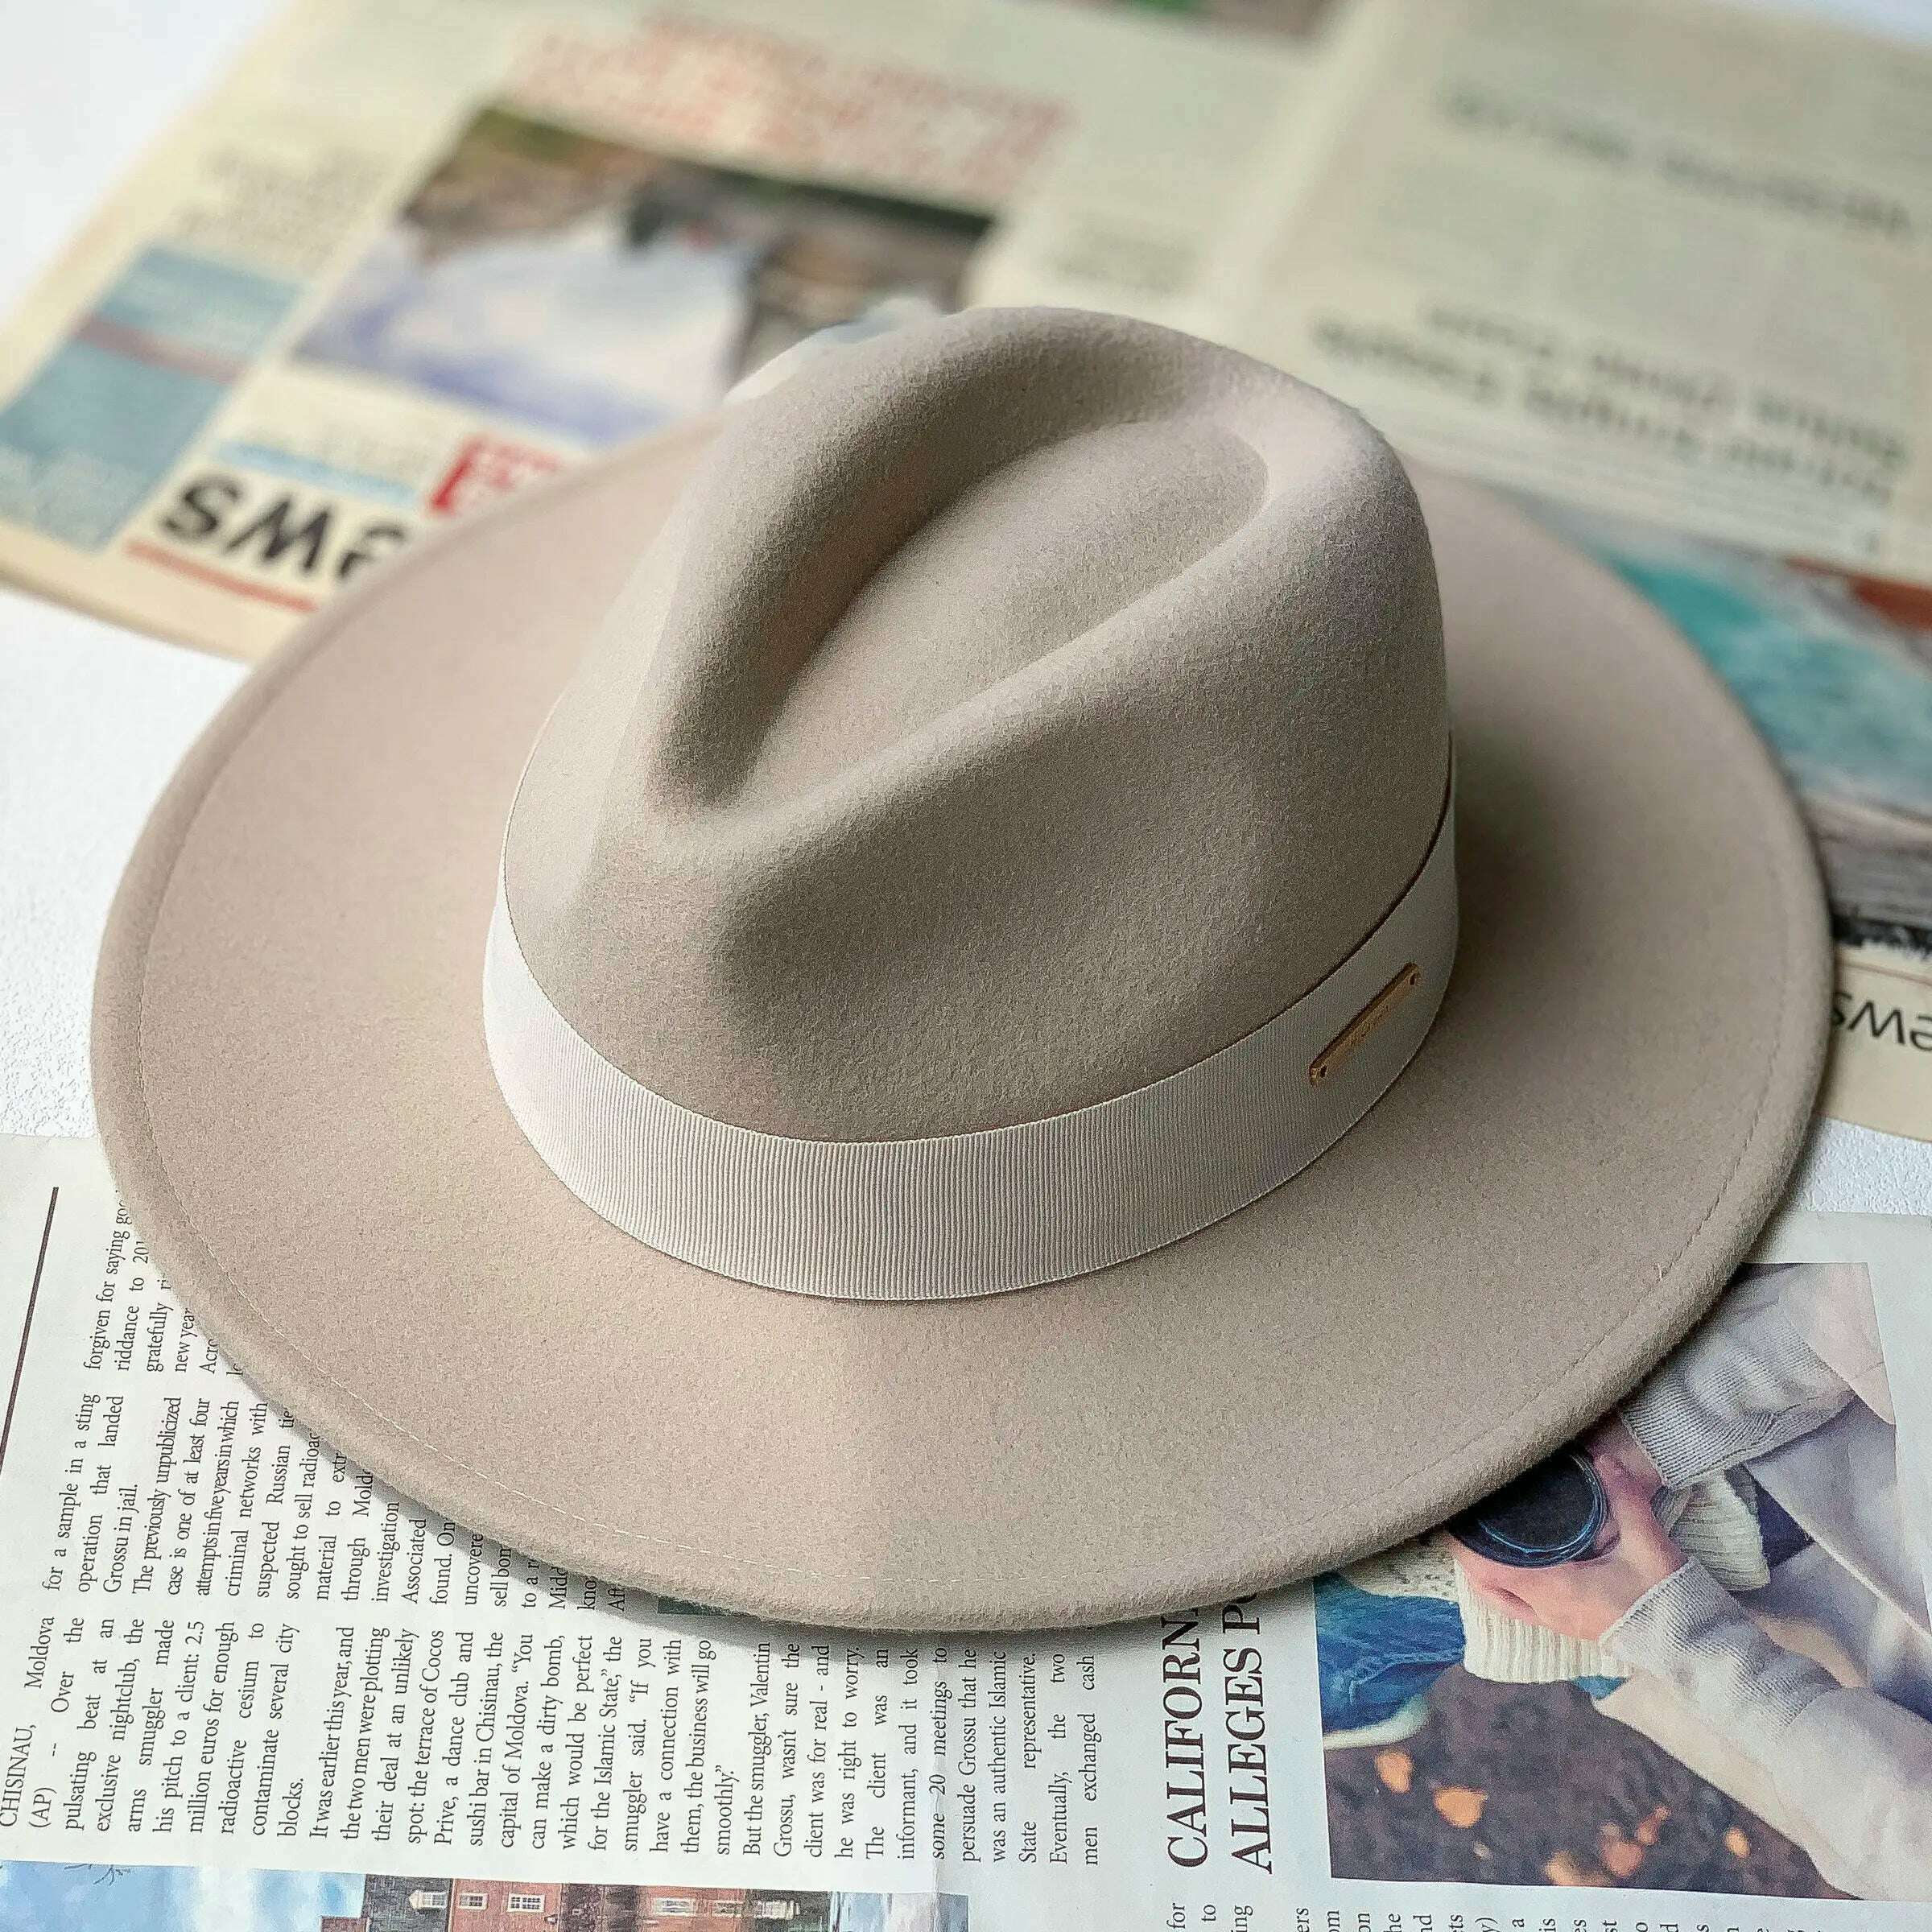 KIMLUD, New Fall Winter Flat Woollen Top Hat Unisex Wide Brimmed Hat Fashion Classic Diverse Styles Adjustable Hat Circumference Big Hat, Beige gray / M 54-57cm / China, KIMLUD Womens Clothes